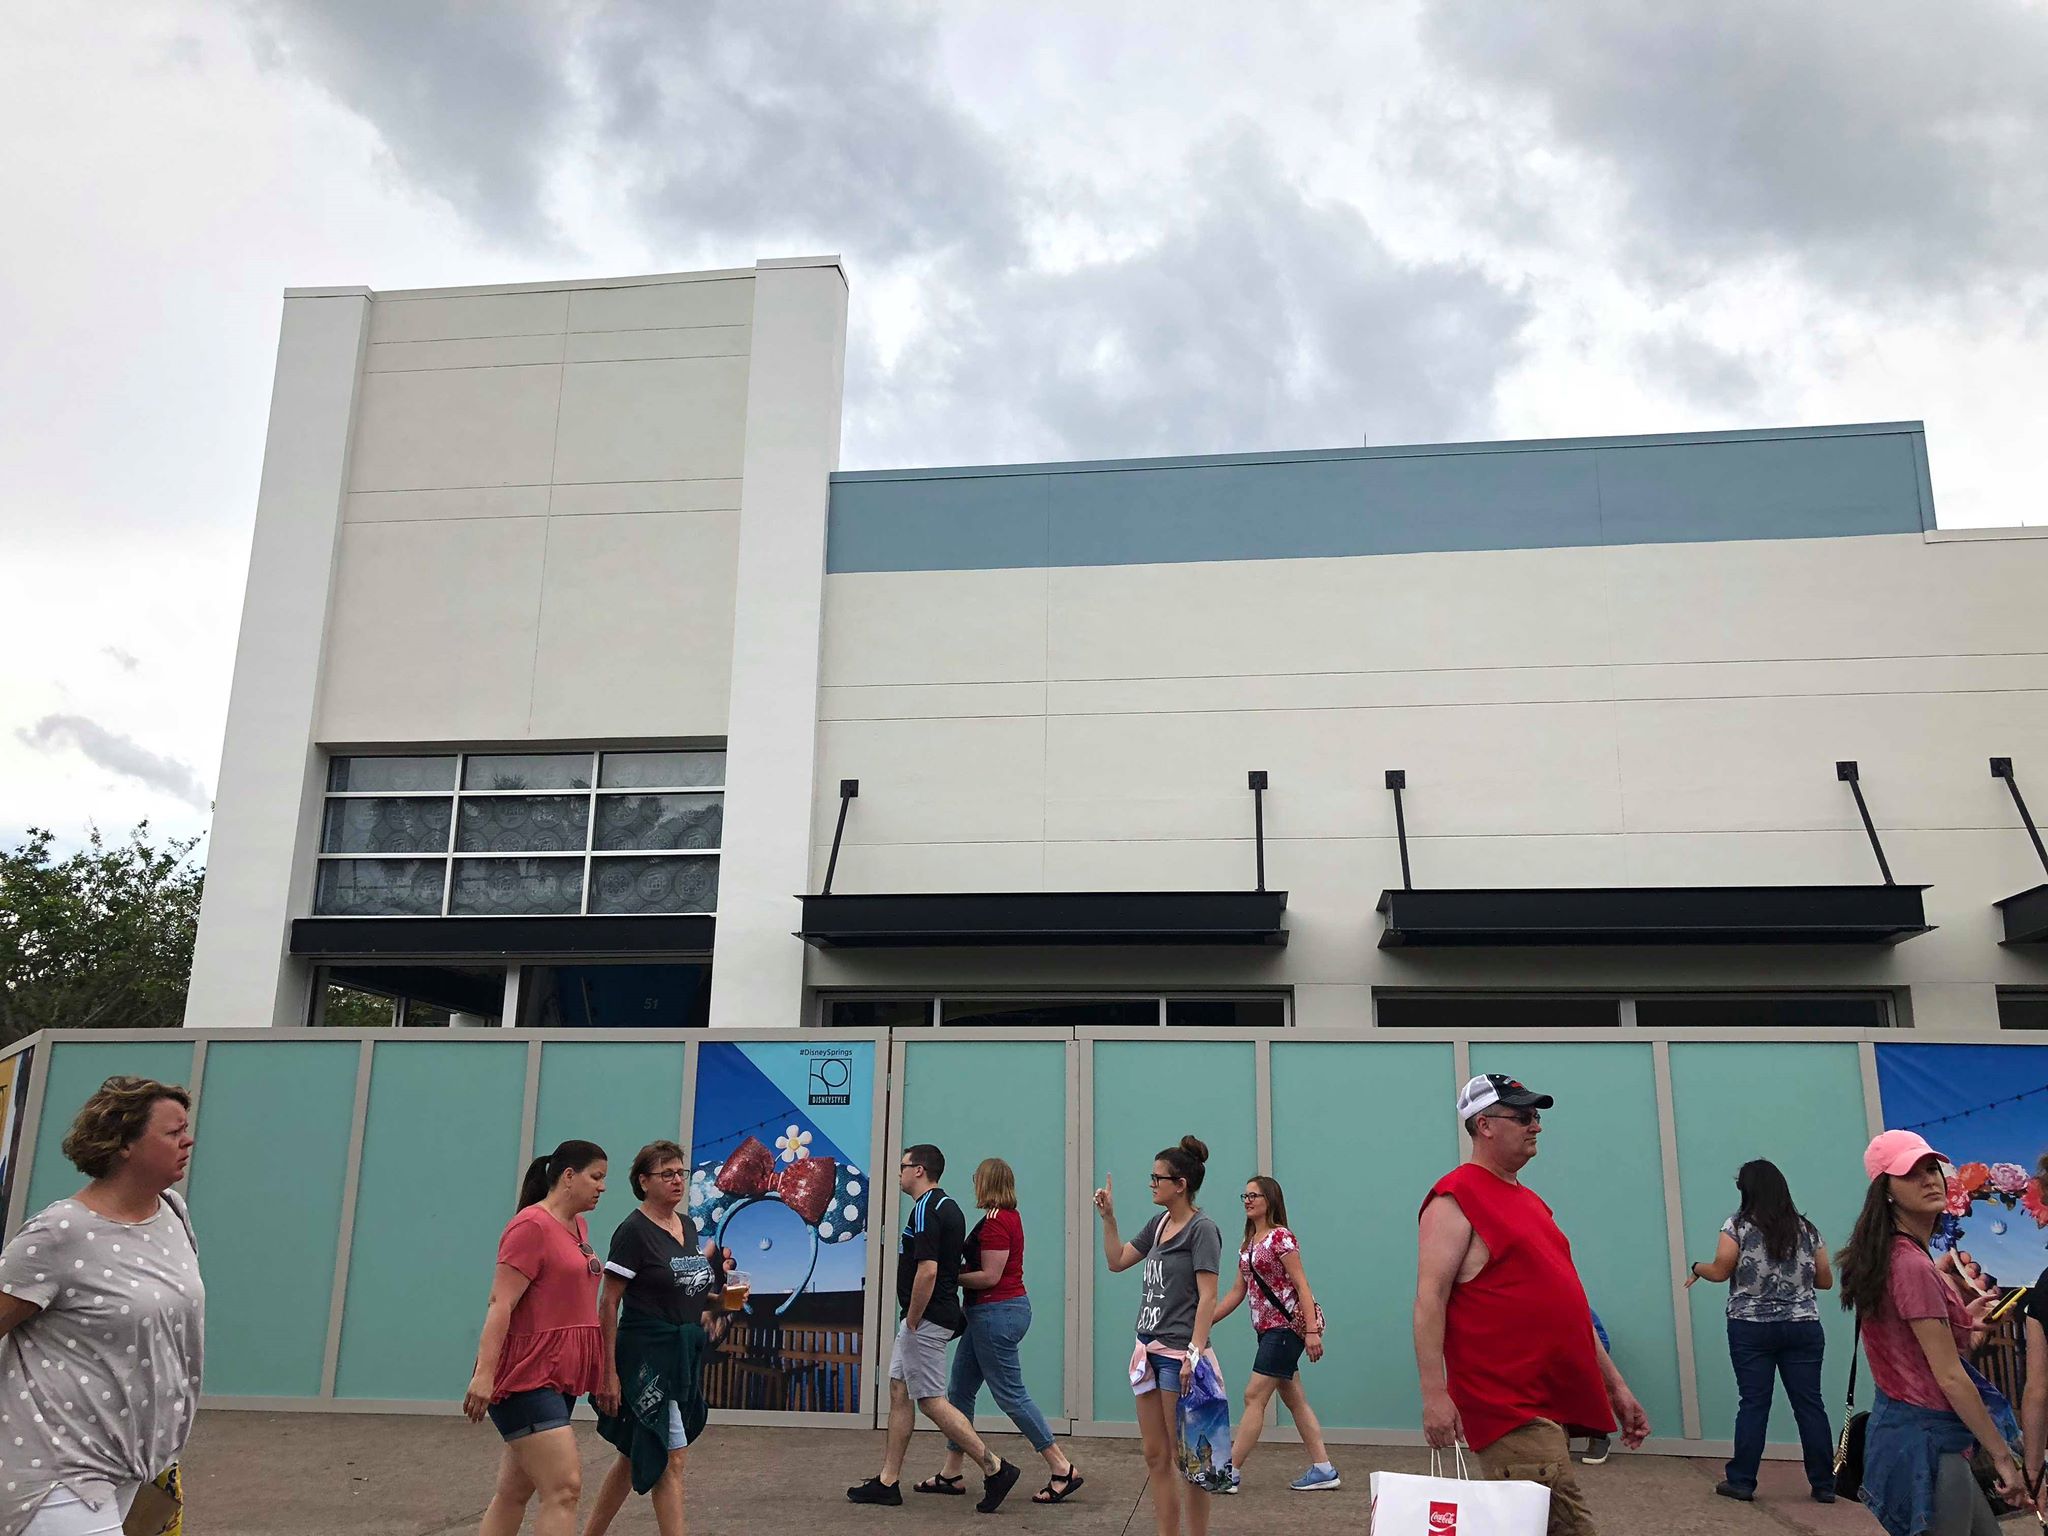 Construction Update on DisneyStyle at Disney Springs